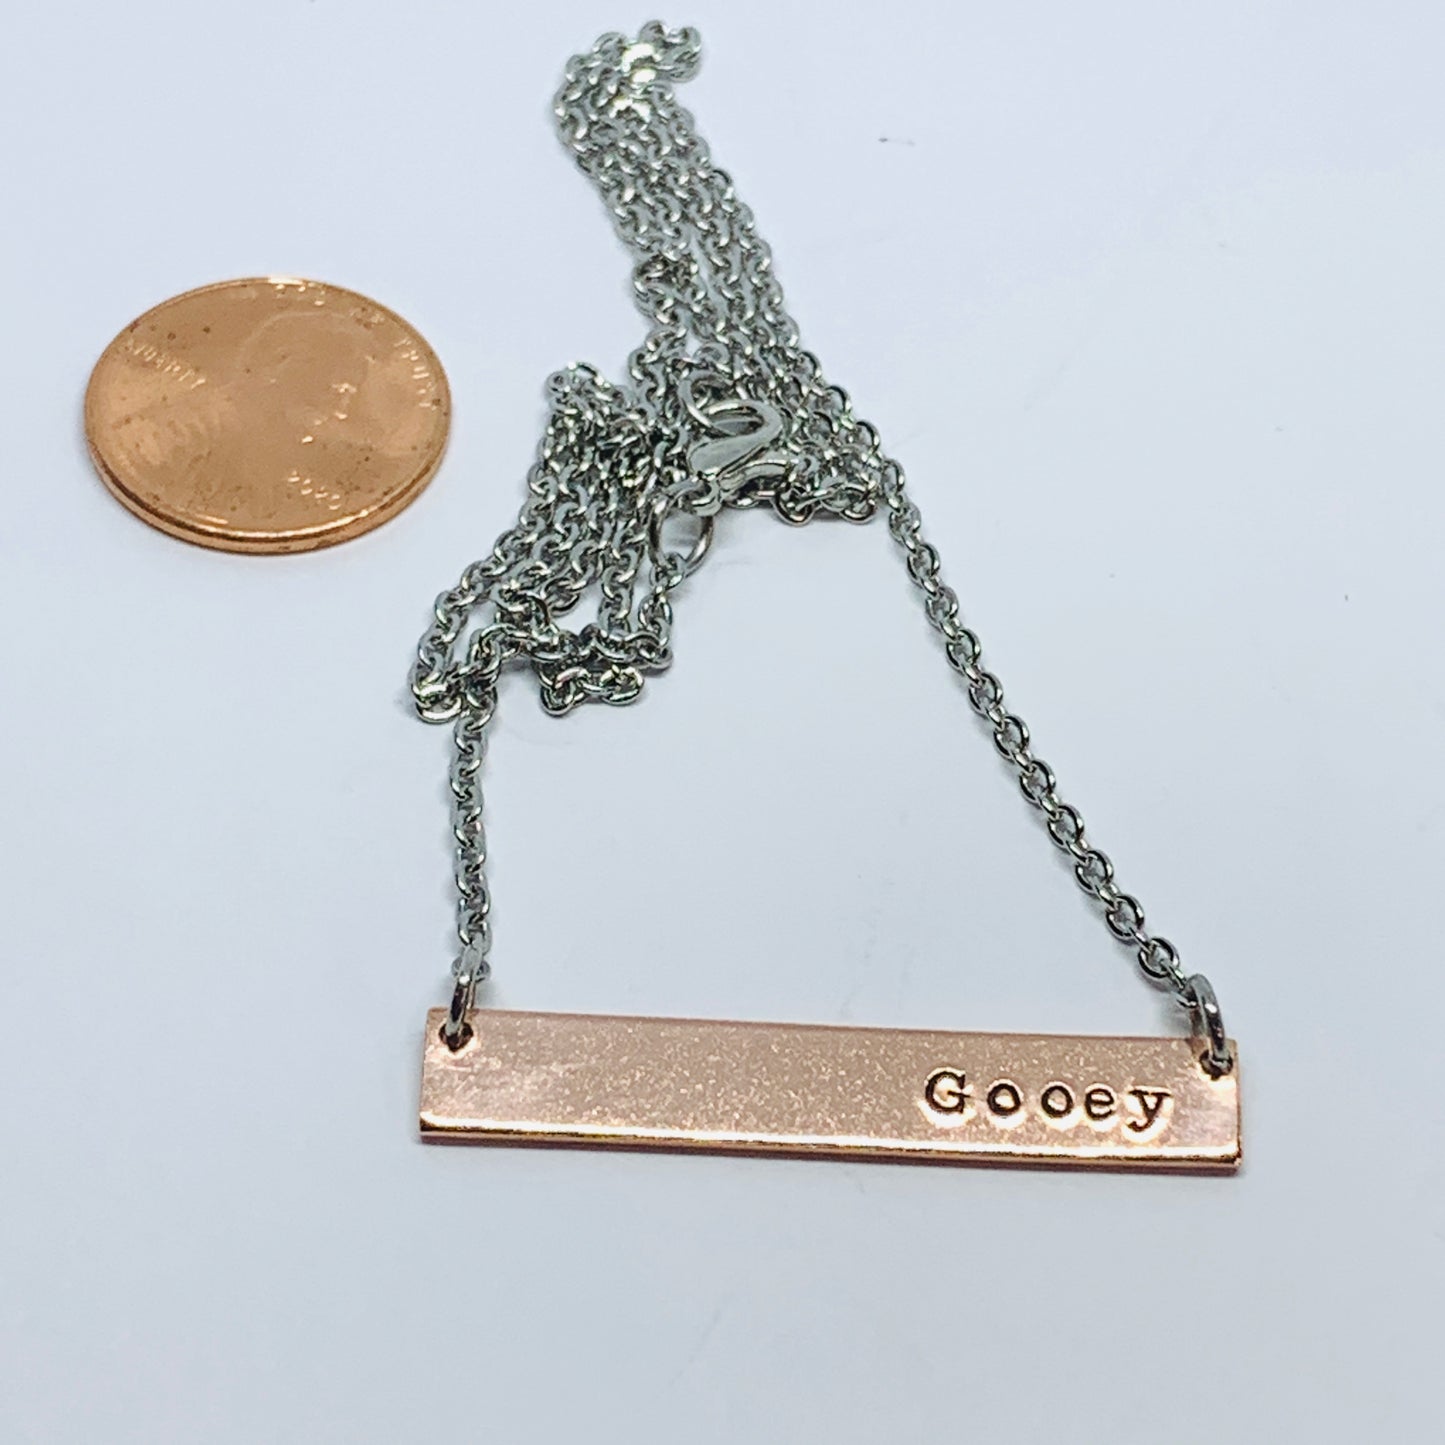 Gooey* - Hand Stamped Bar Necklace | Bar Necklace | Name Plate Custom Necklace | Personalized Bar Necklace | Gift for Her